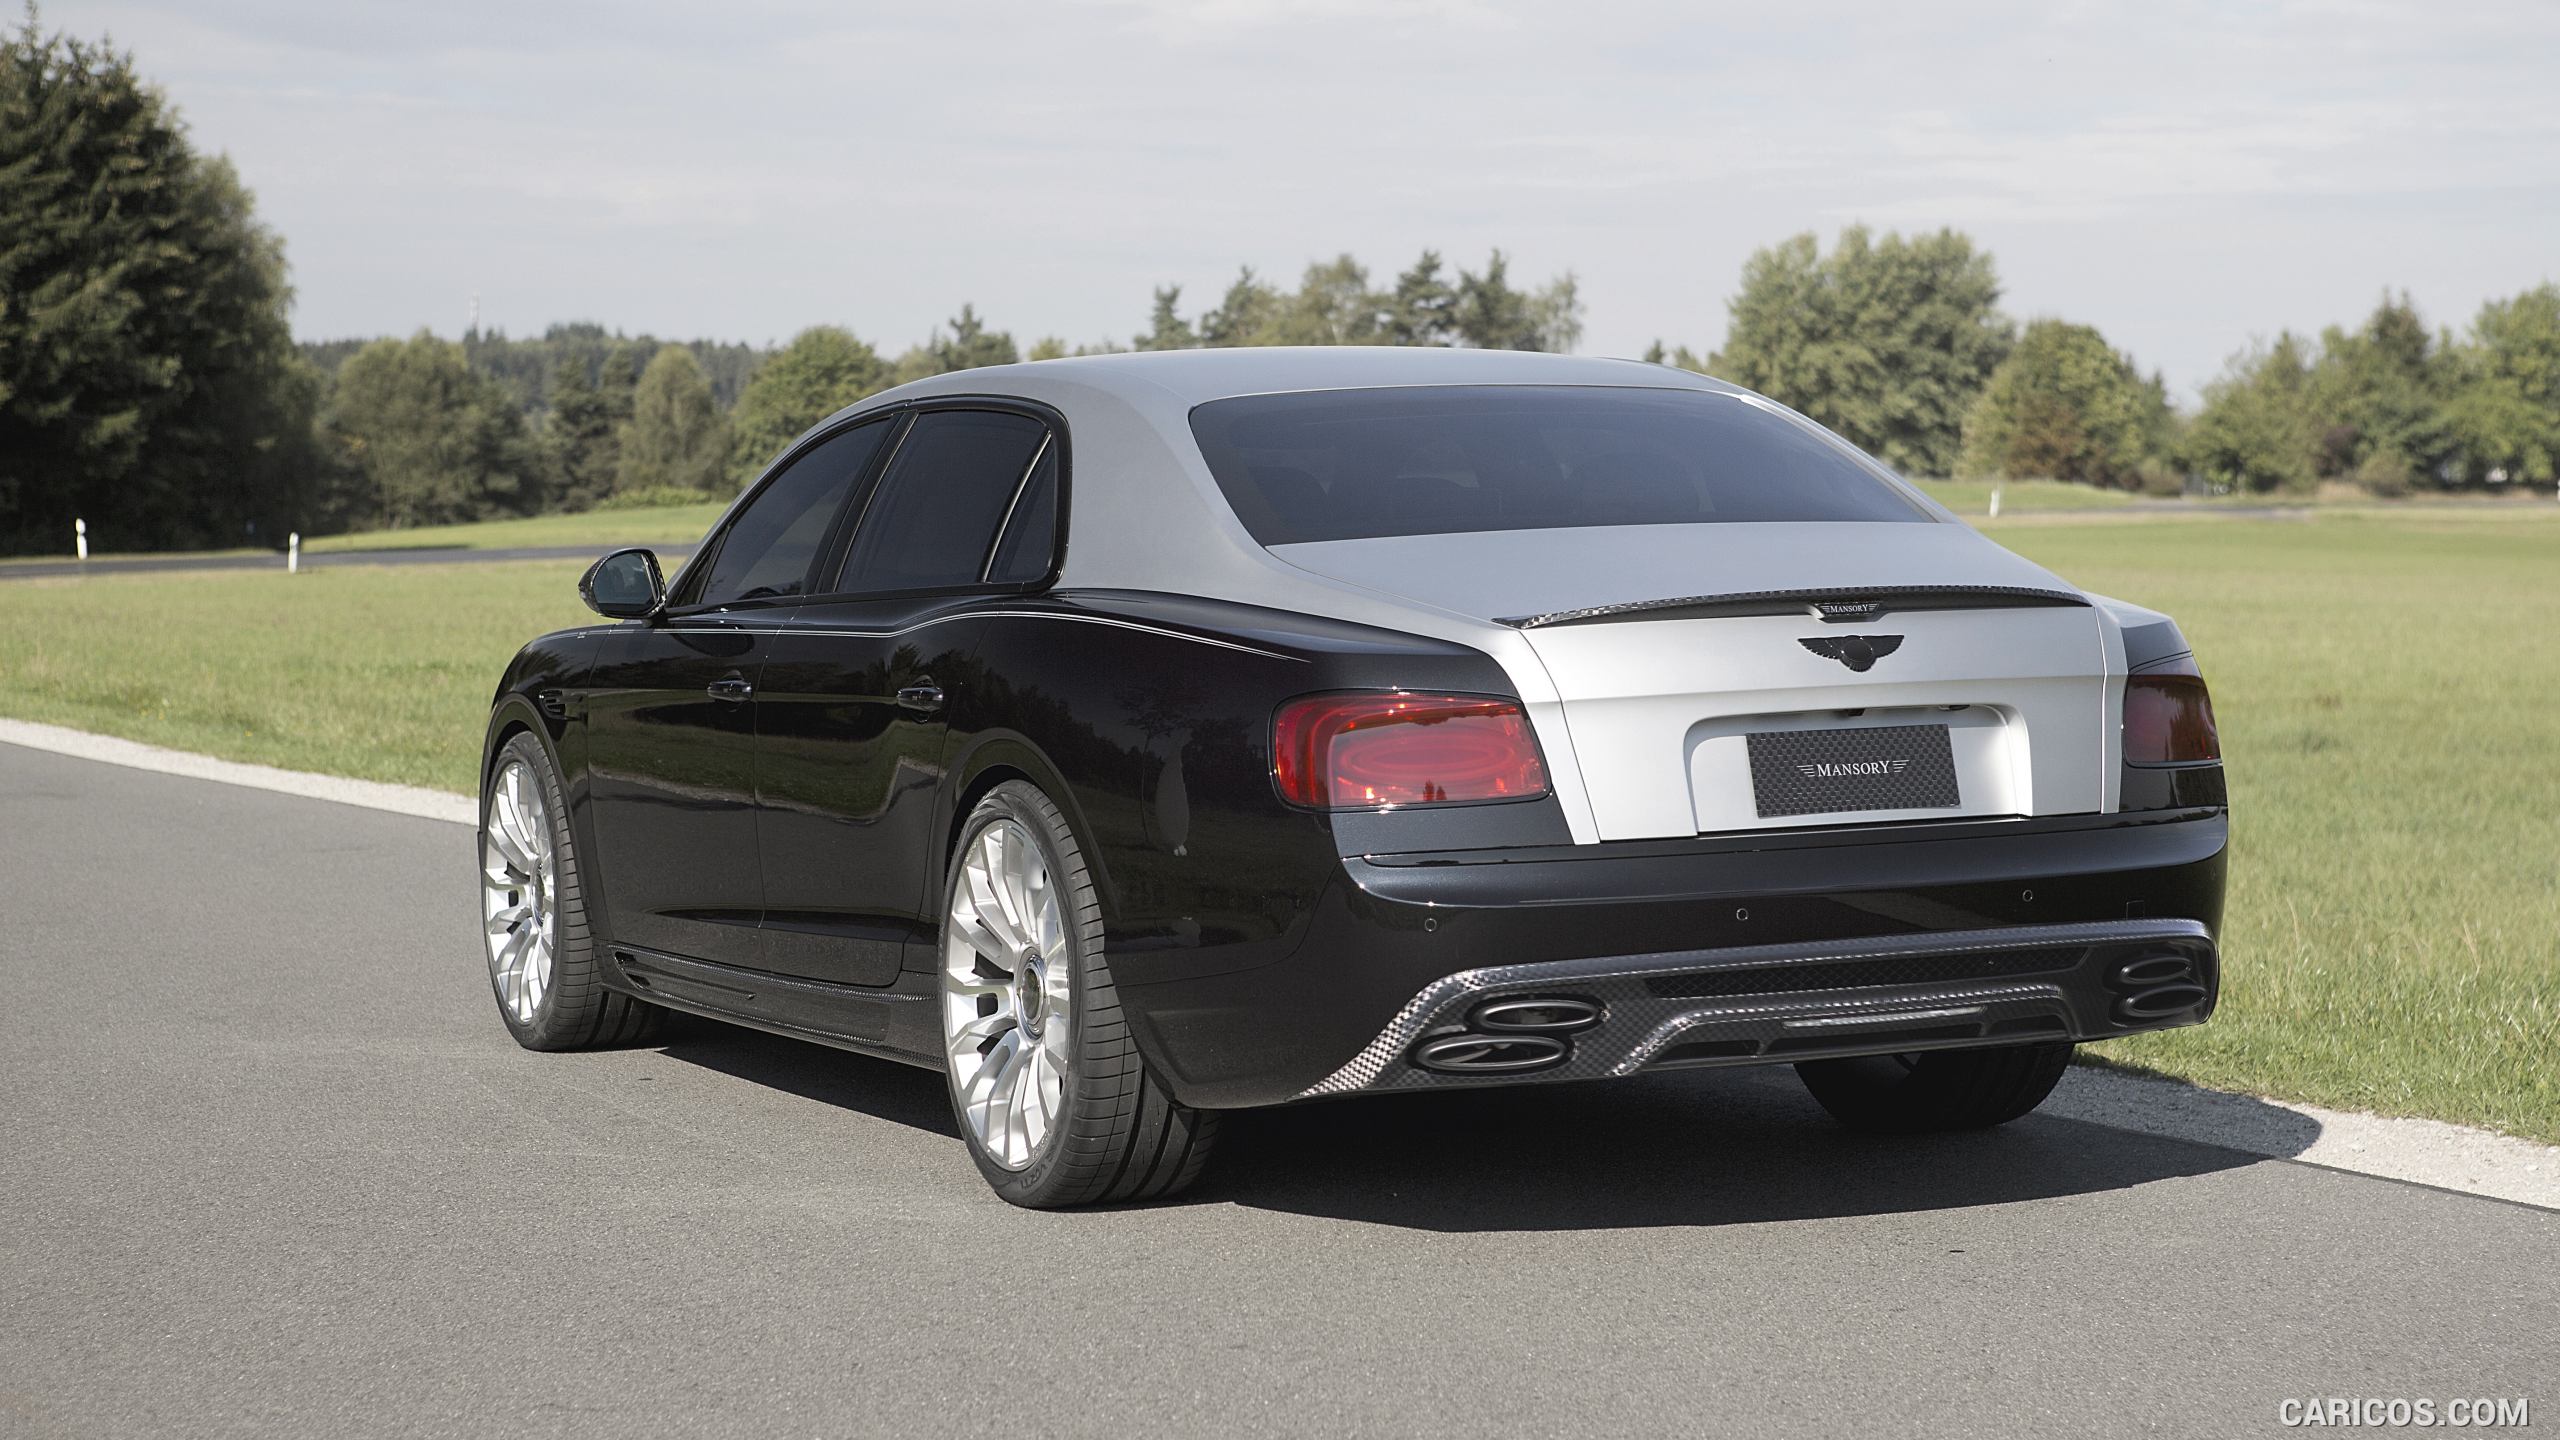 2015 MANSORY Bentley Flying Spur - Rear, #2 of 9